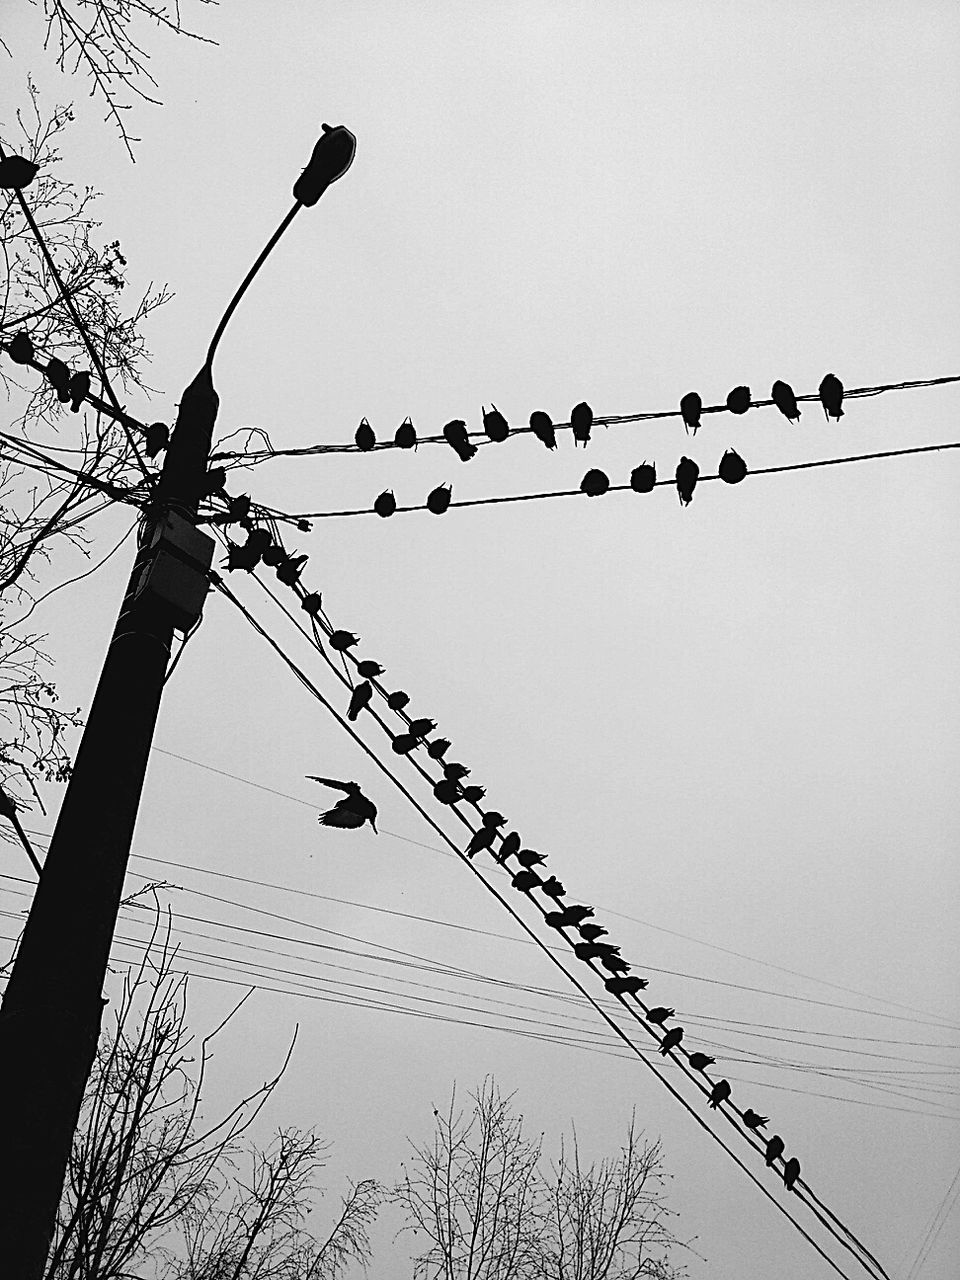 bird, animal themes, large group of animals, no people, low angle view, clear sky, flock of birds, electricity, outdoors, silhouette, animal wildlife, sky, animals in the wild, connection, day, perching